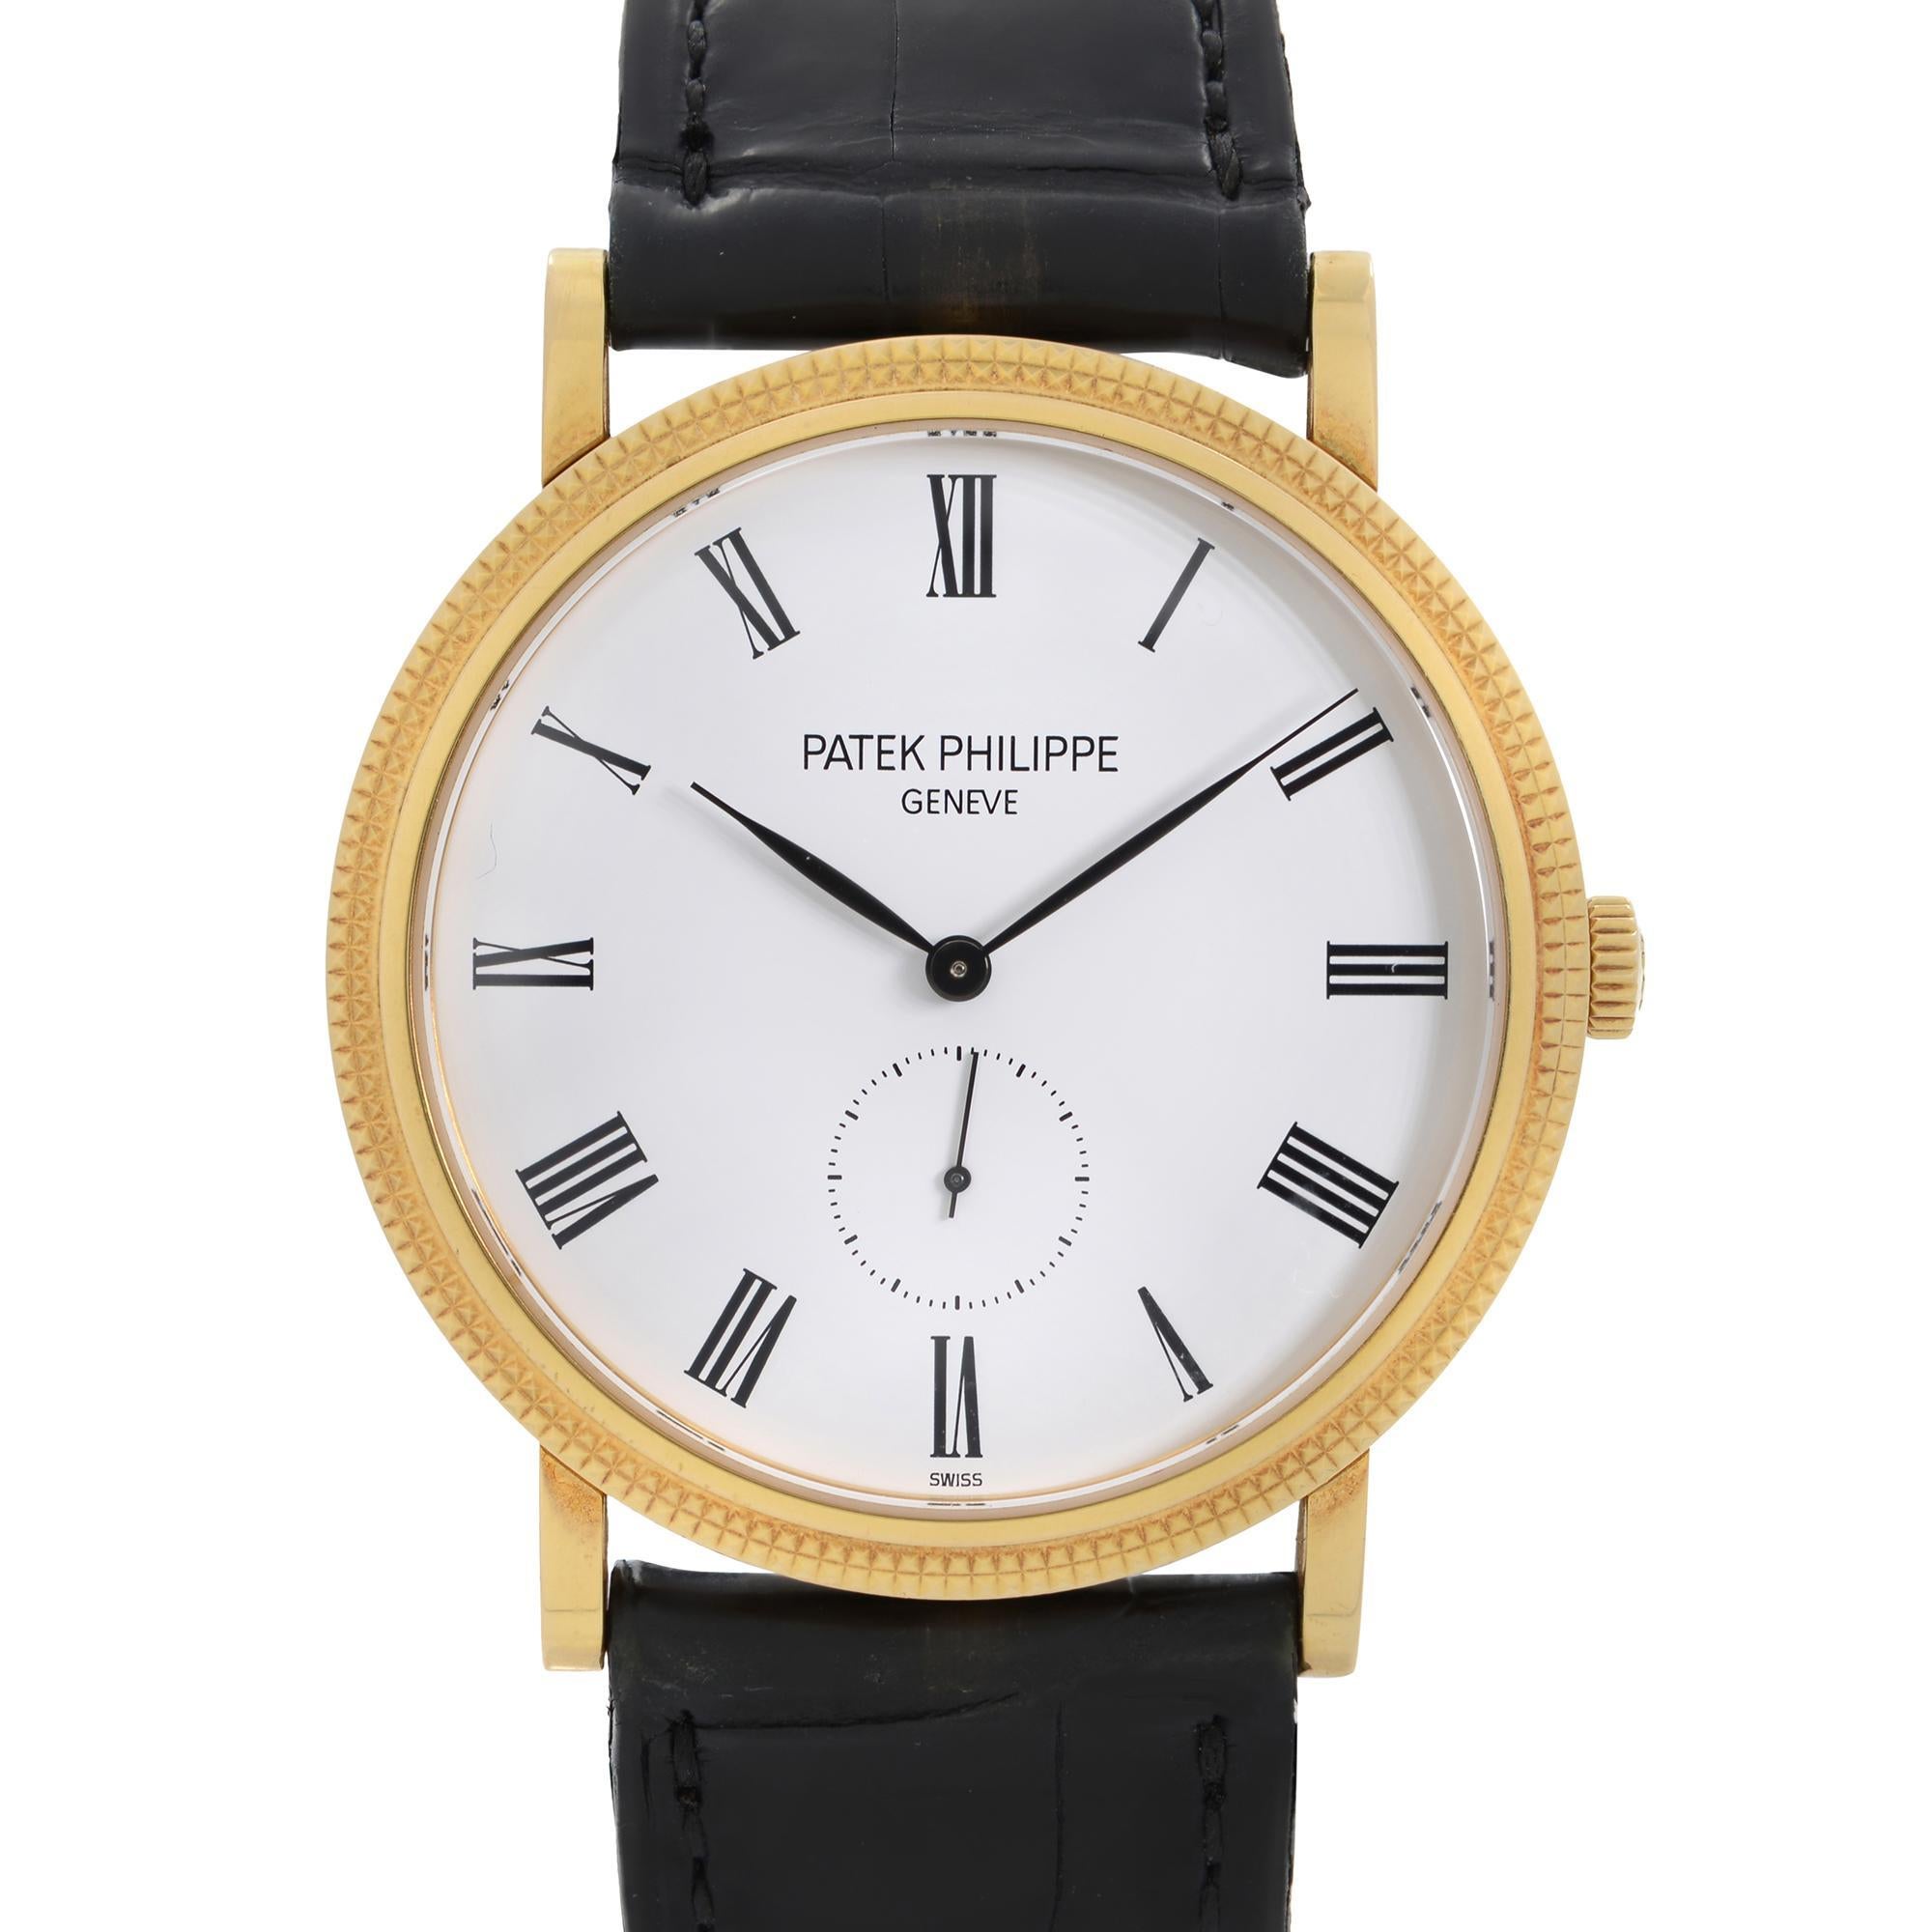 Pre-owned Patek Philippe Calatrava Yellow Gold White Roman Dial Hand Wind Watch 5119J-001. Stains, and Wear Shown on the Leather Strap. This Timepiece is Powered by a Hand Wind Movement and Features: Round 18k Yellow Gold Case with A Black Leather